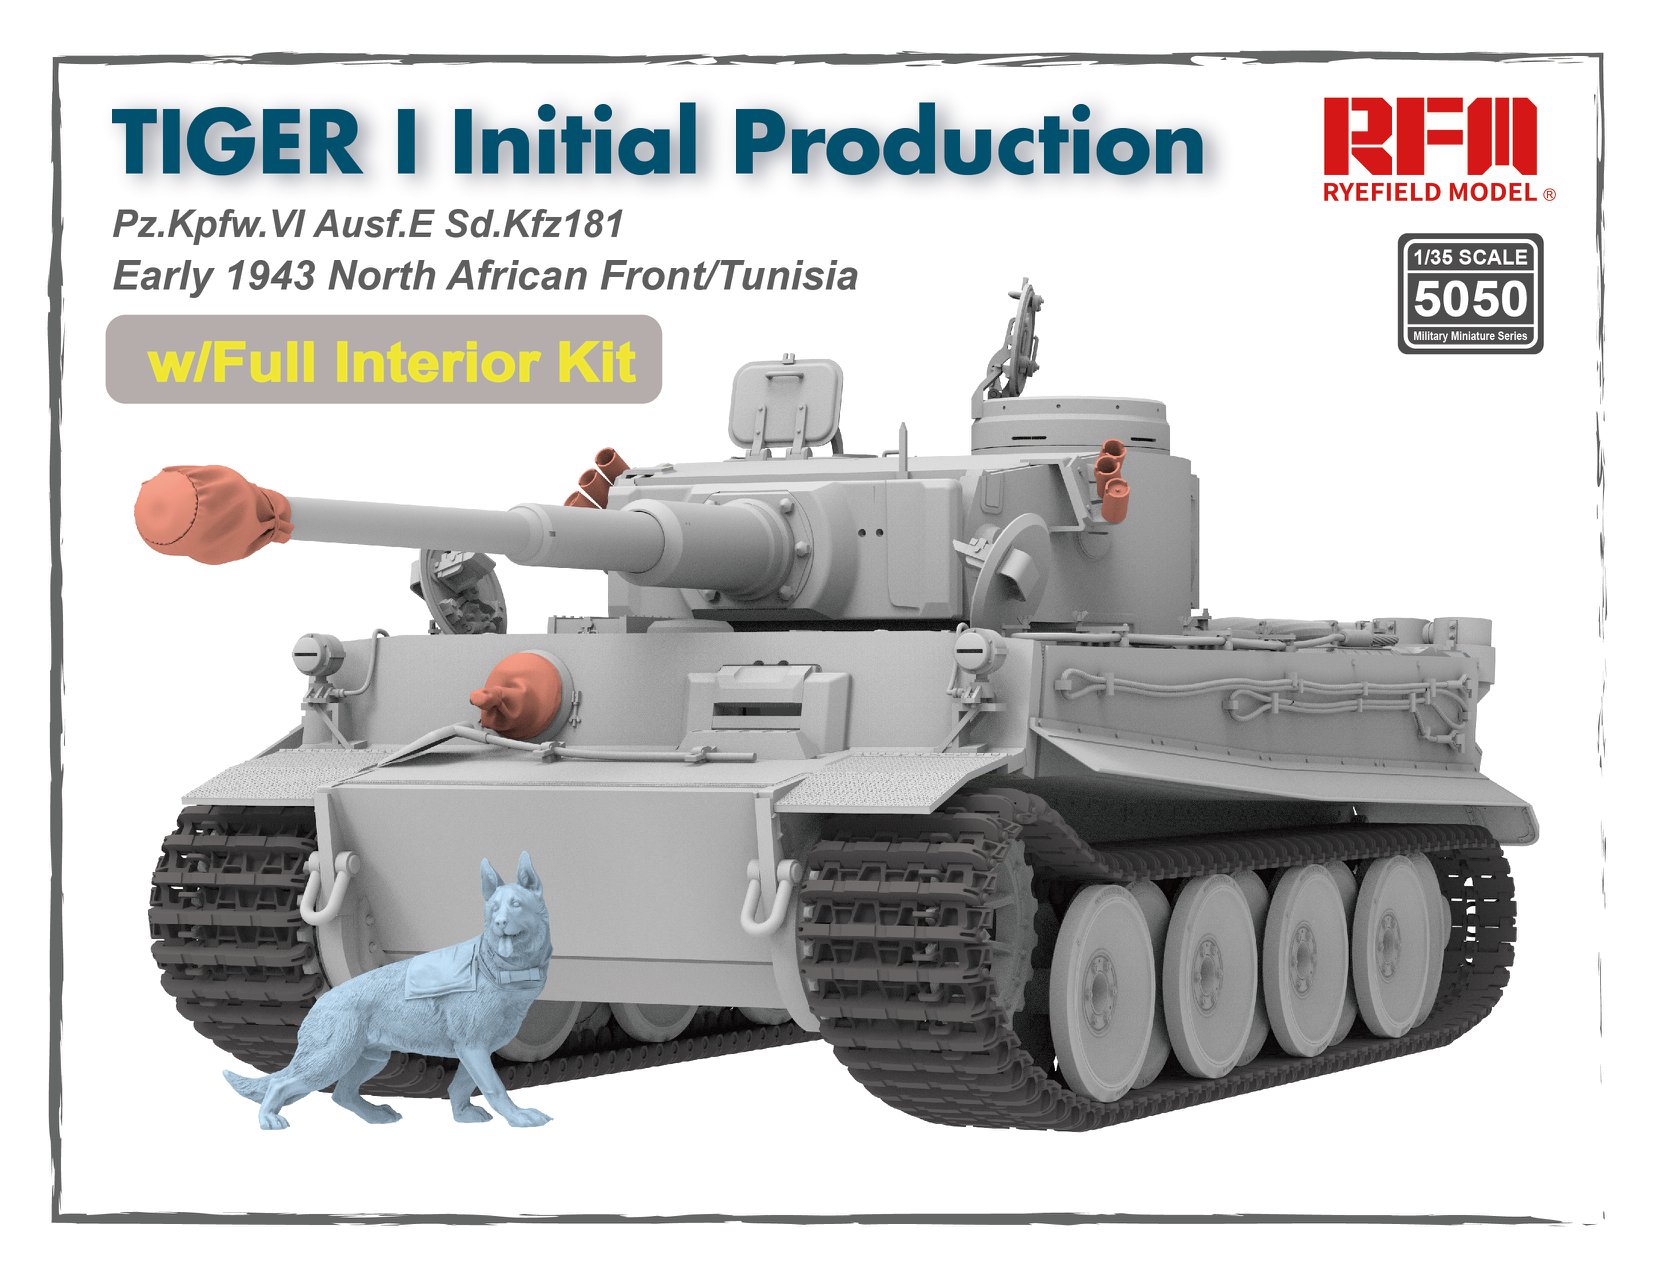 TIGER I Initial Production